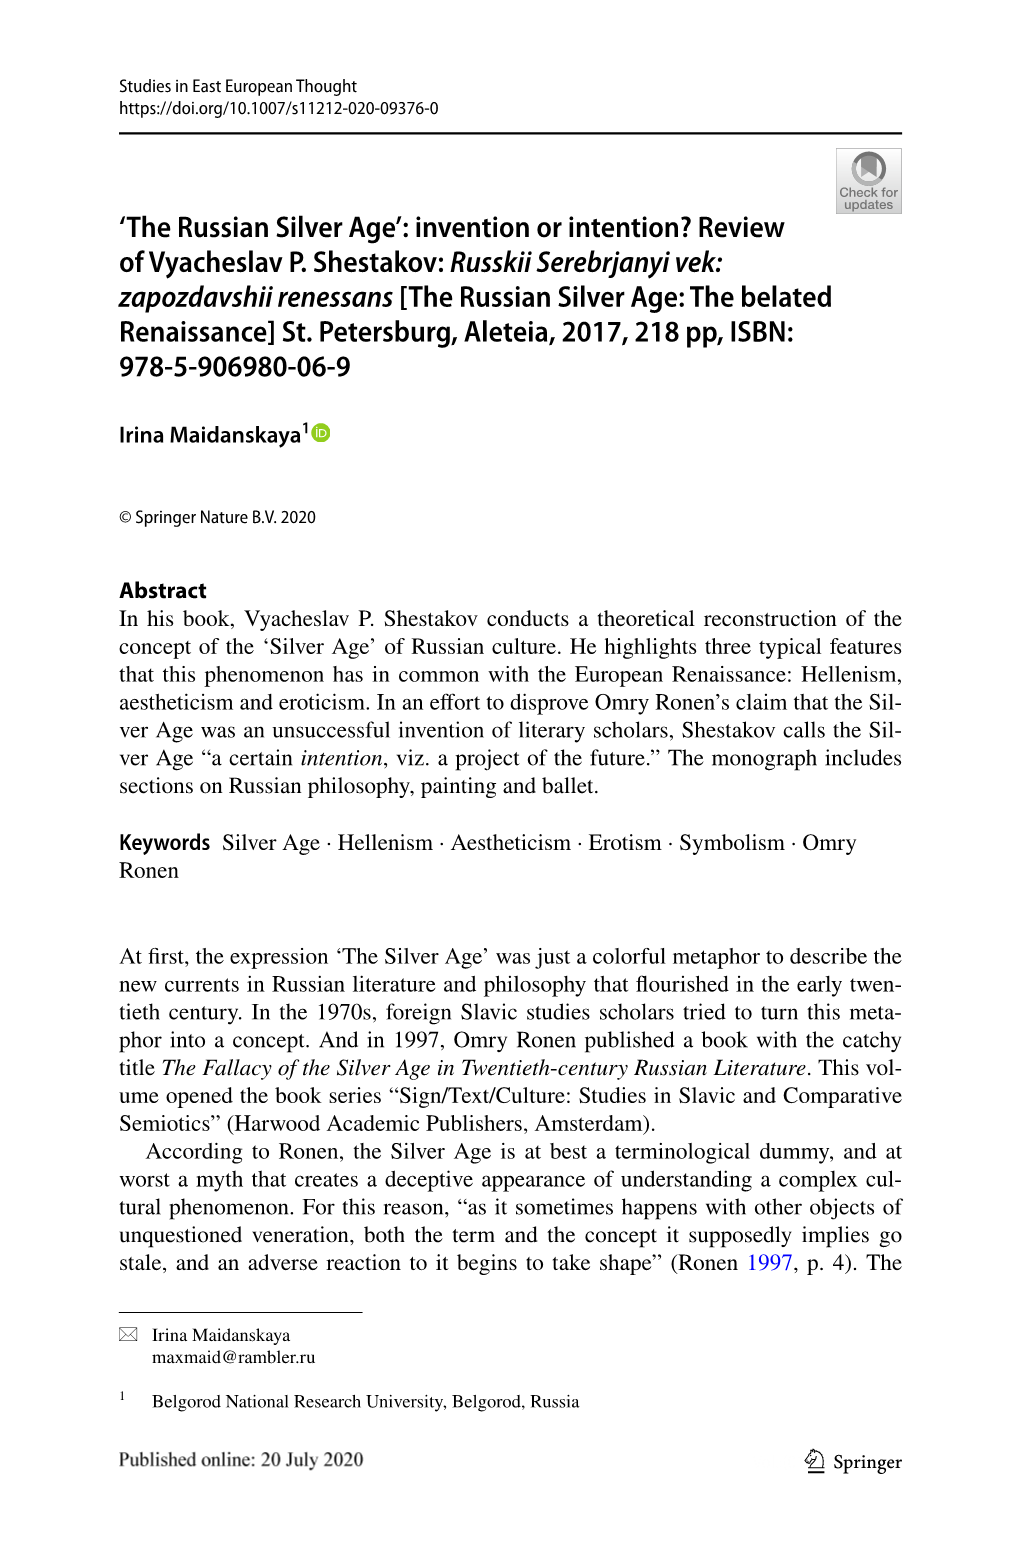 'The Russian Silver Age': Invention Or Intention? Review of Vyacheslav P